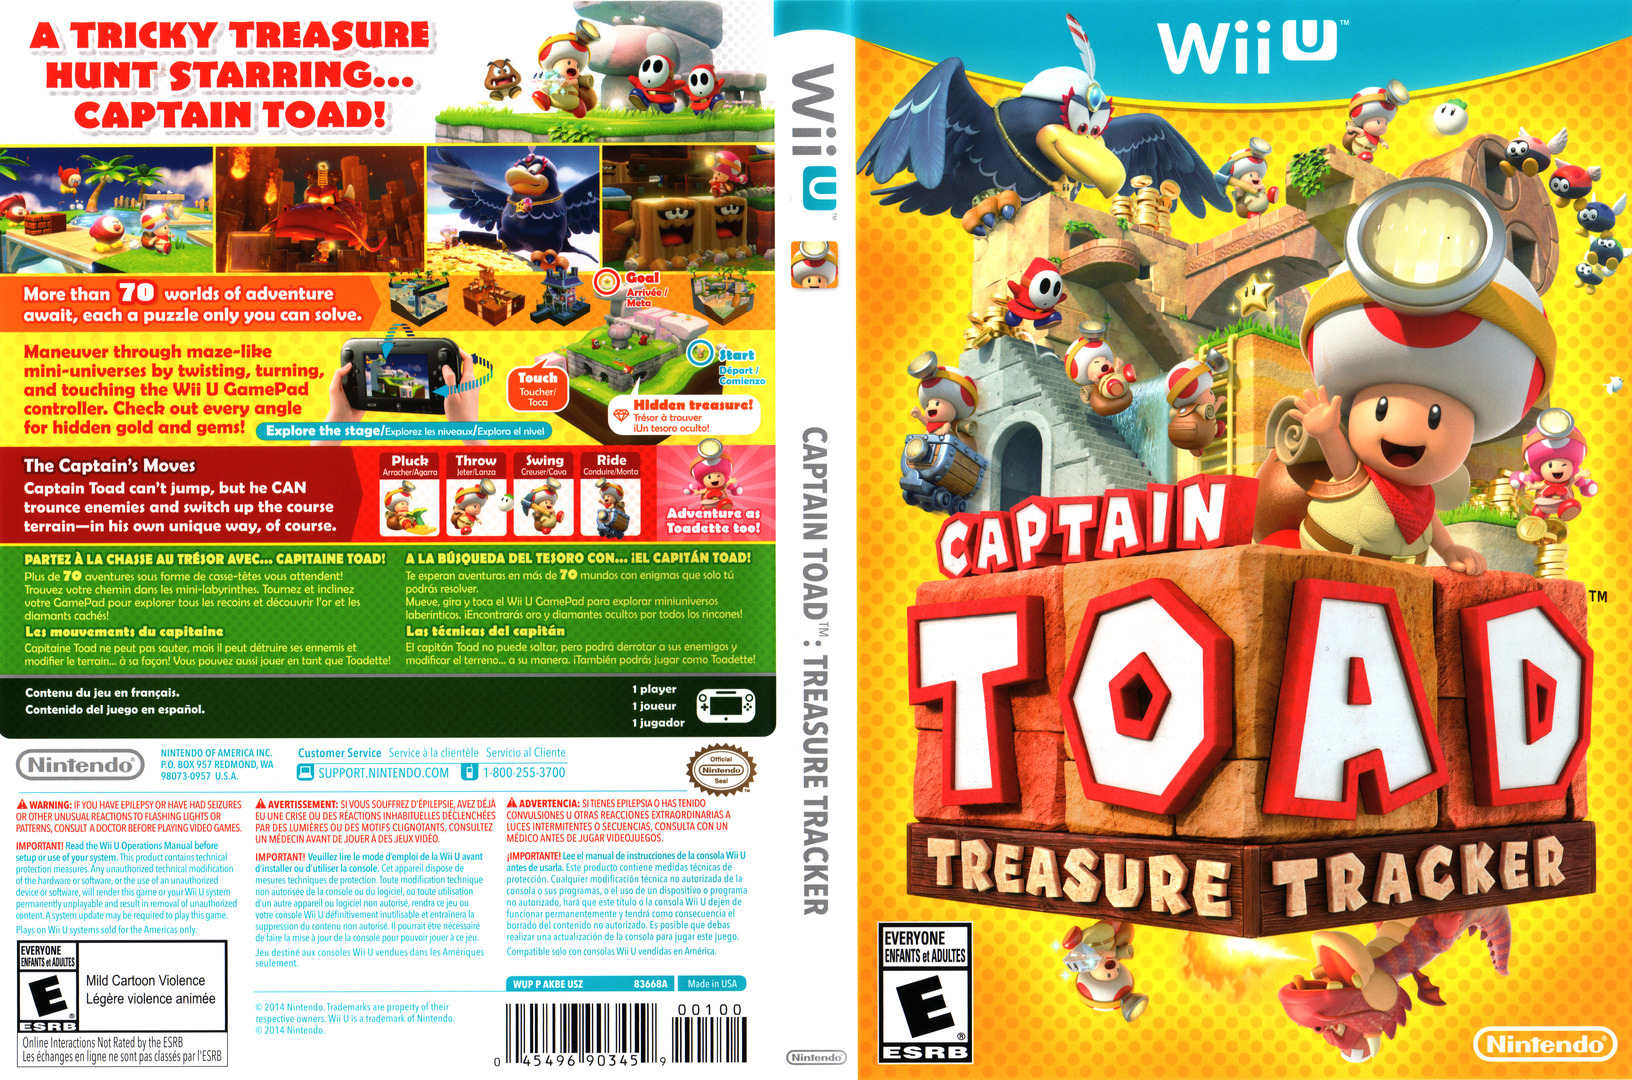 Captain Toad: Treasure Tracker Pics, Video Game Collection